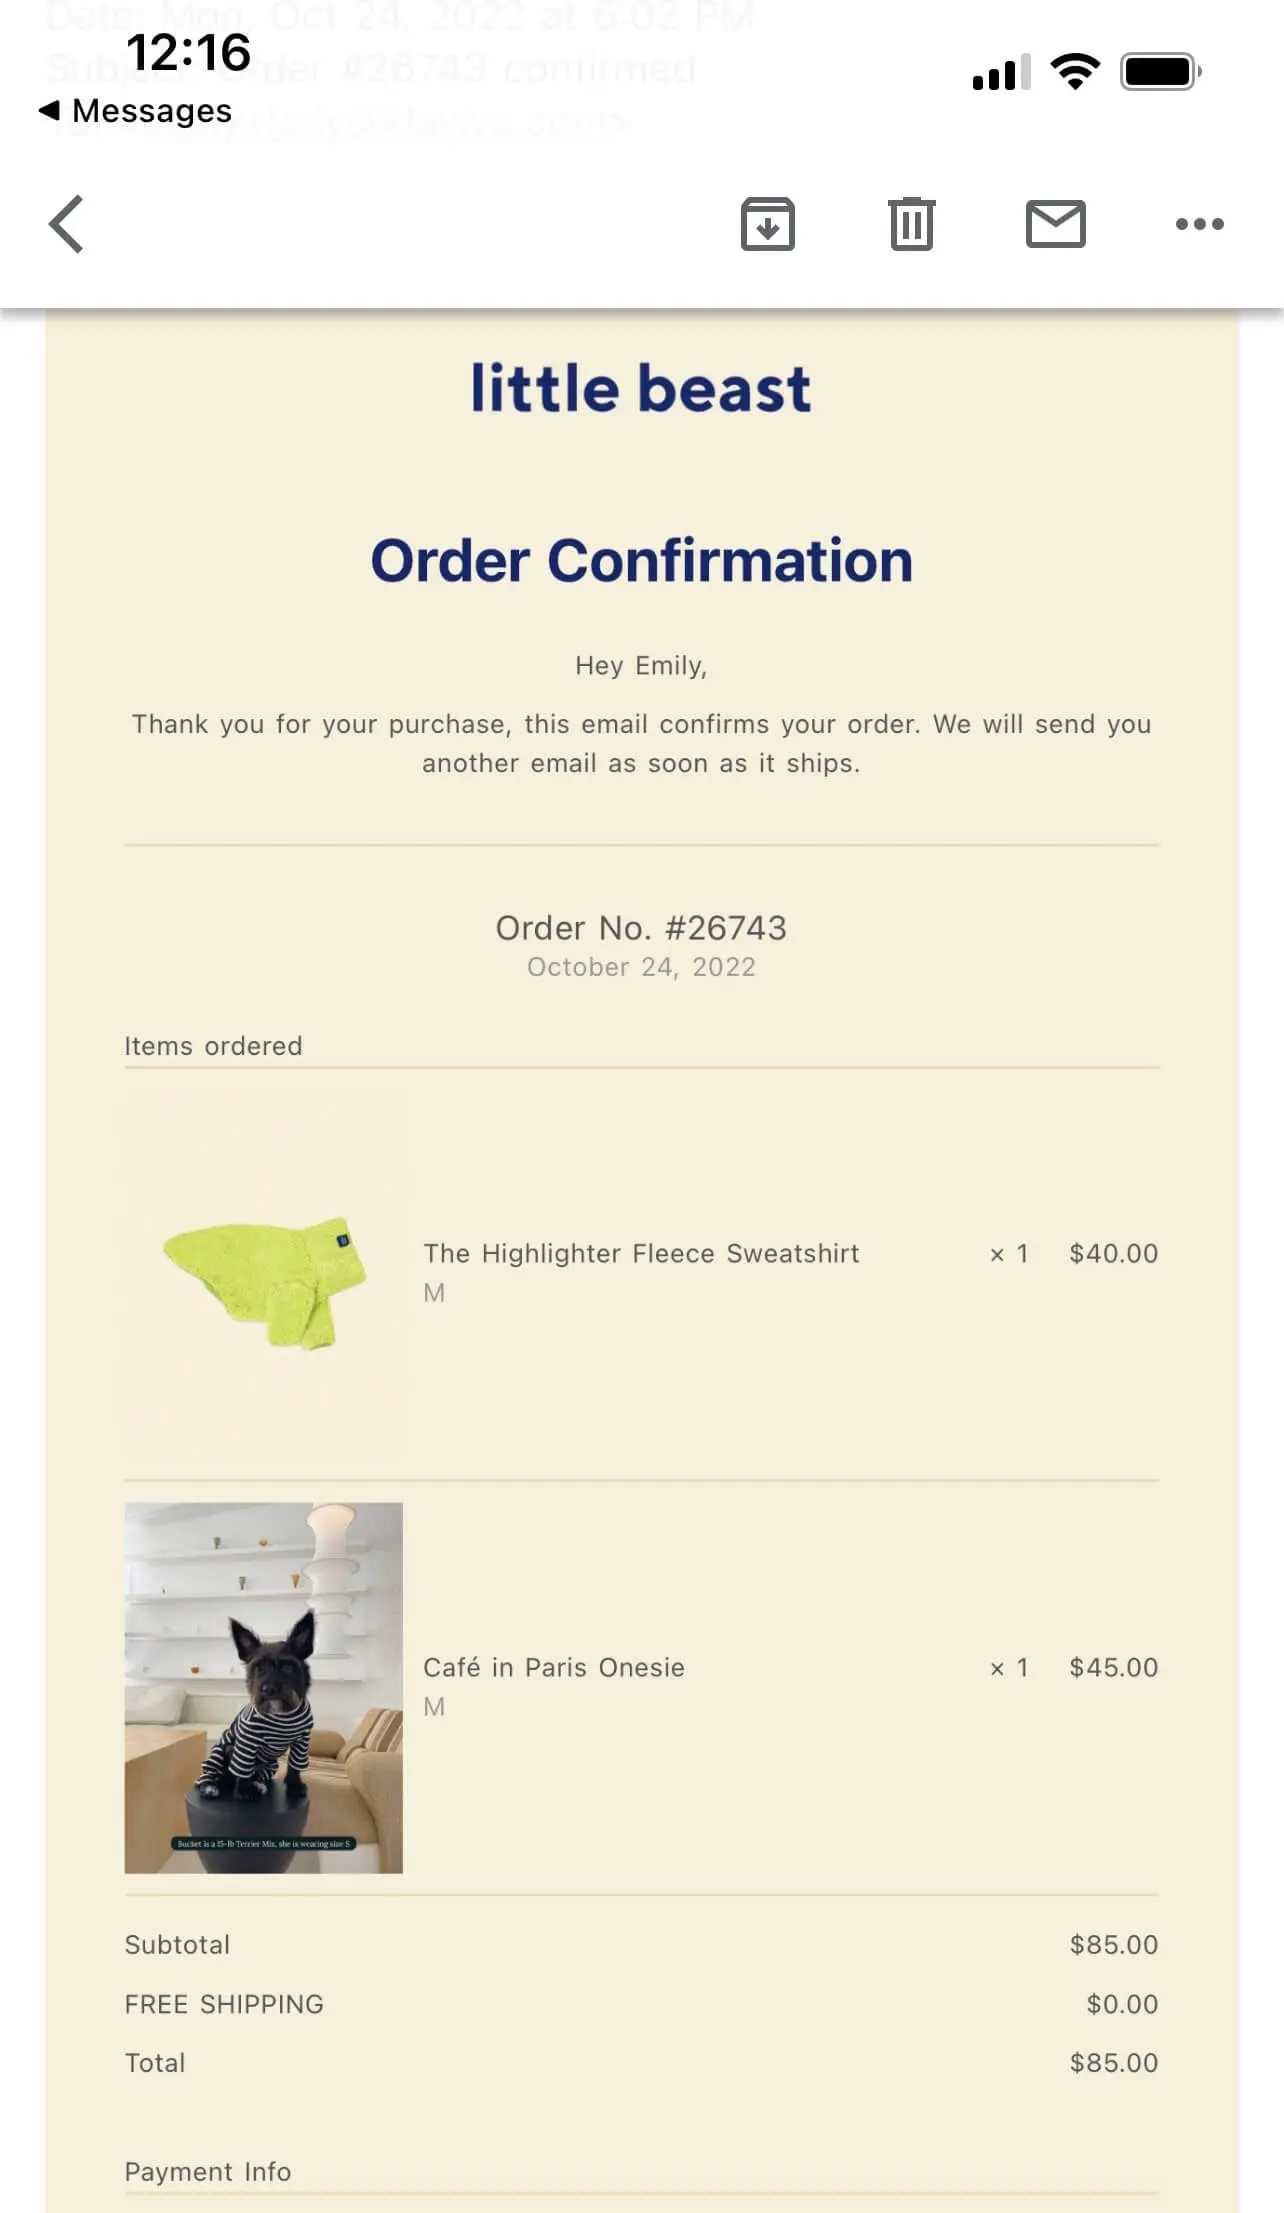 Image shows an order confirmation email from Little Beast, optimized for mobile.